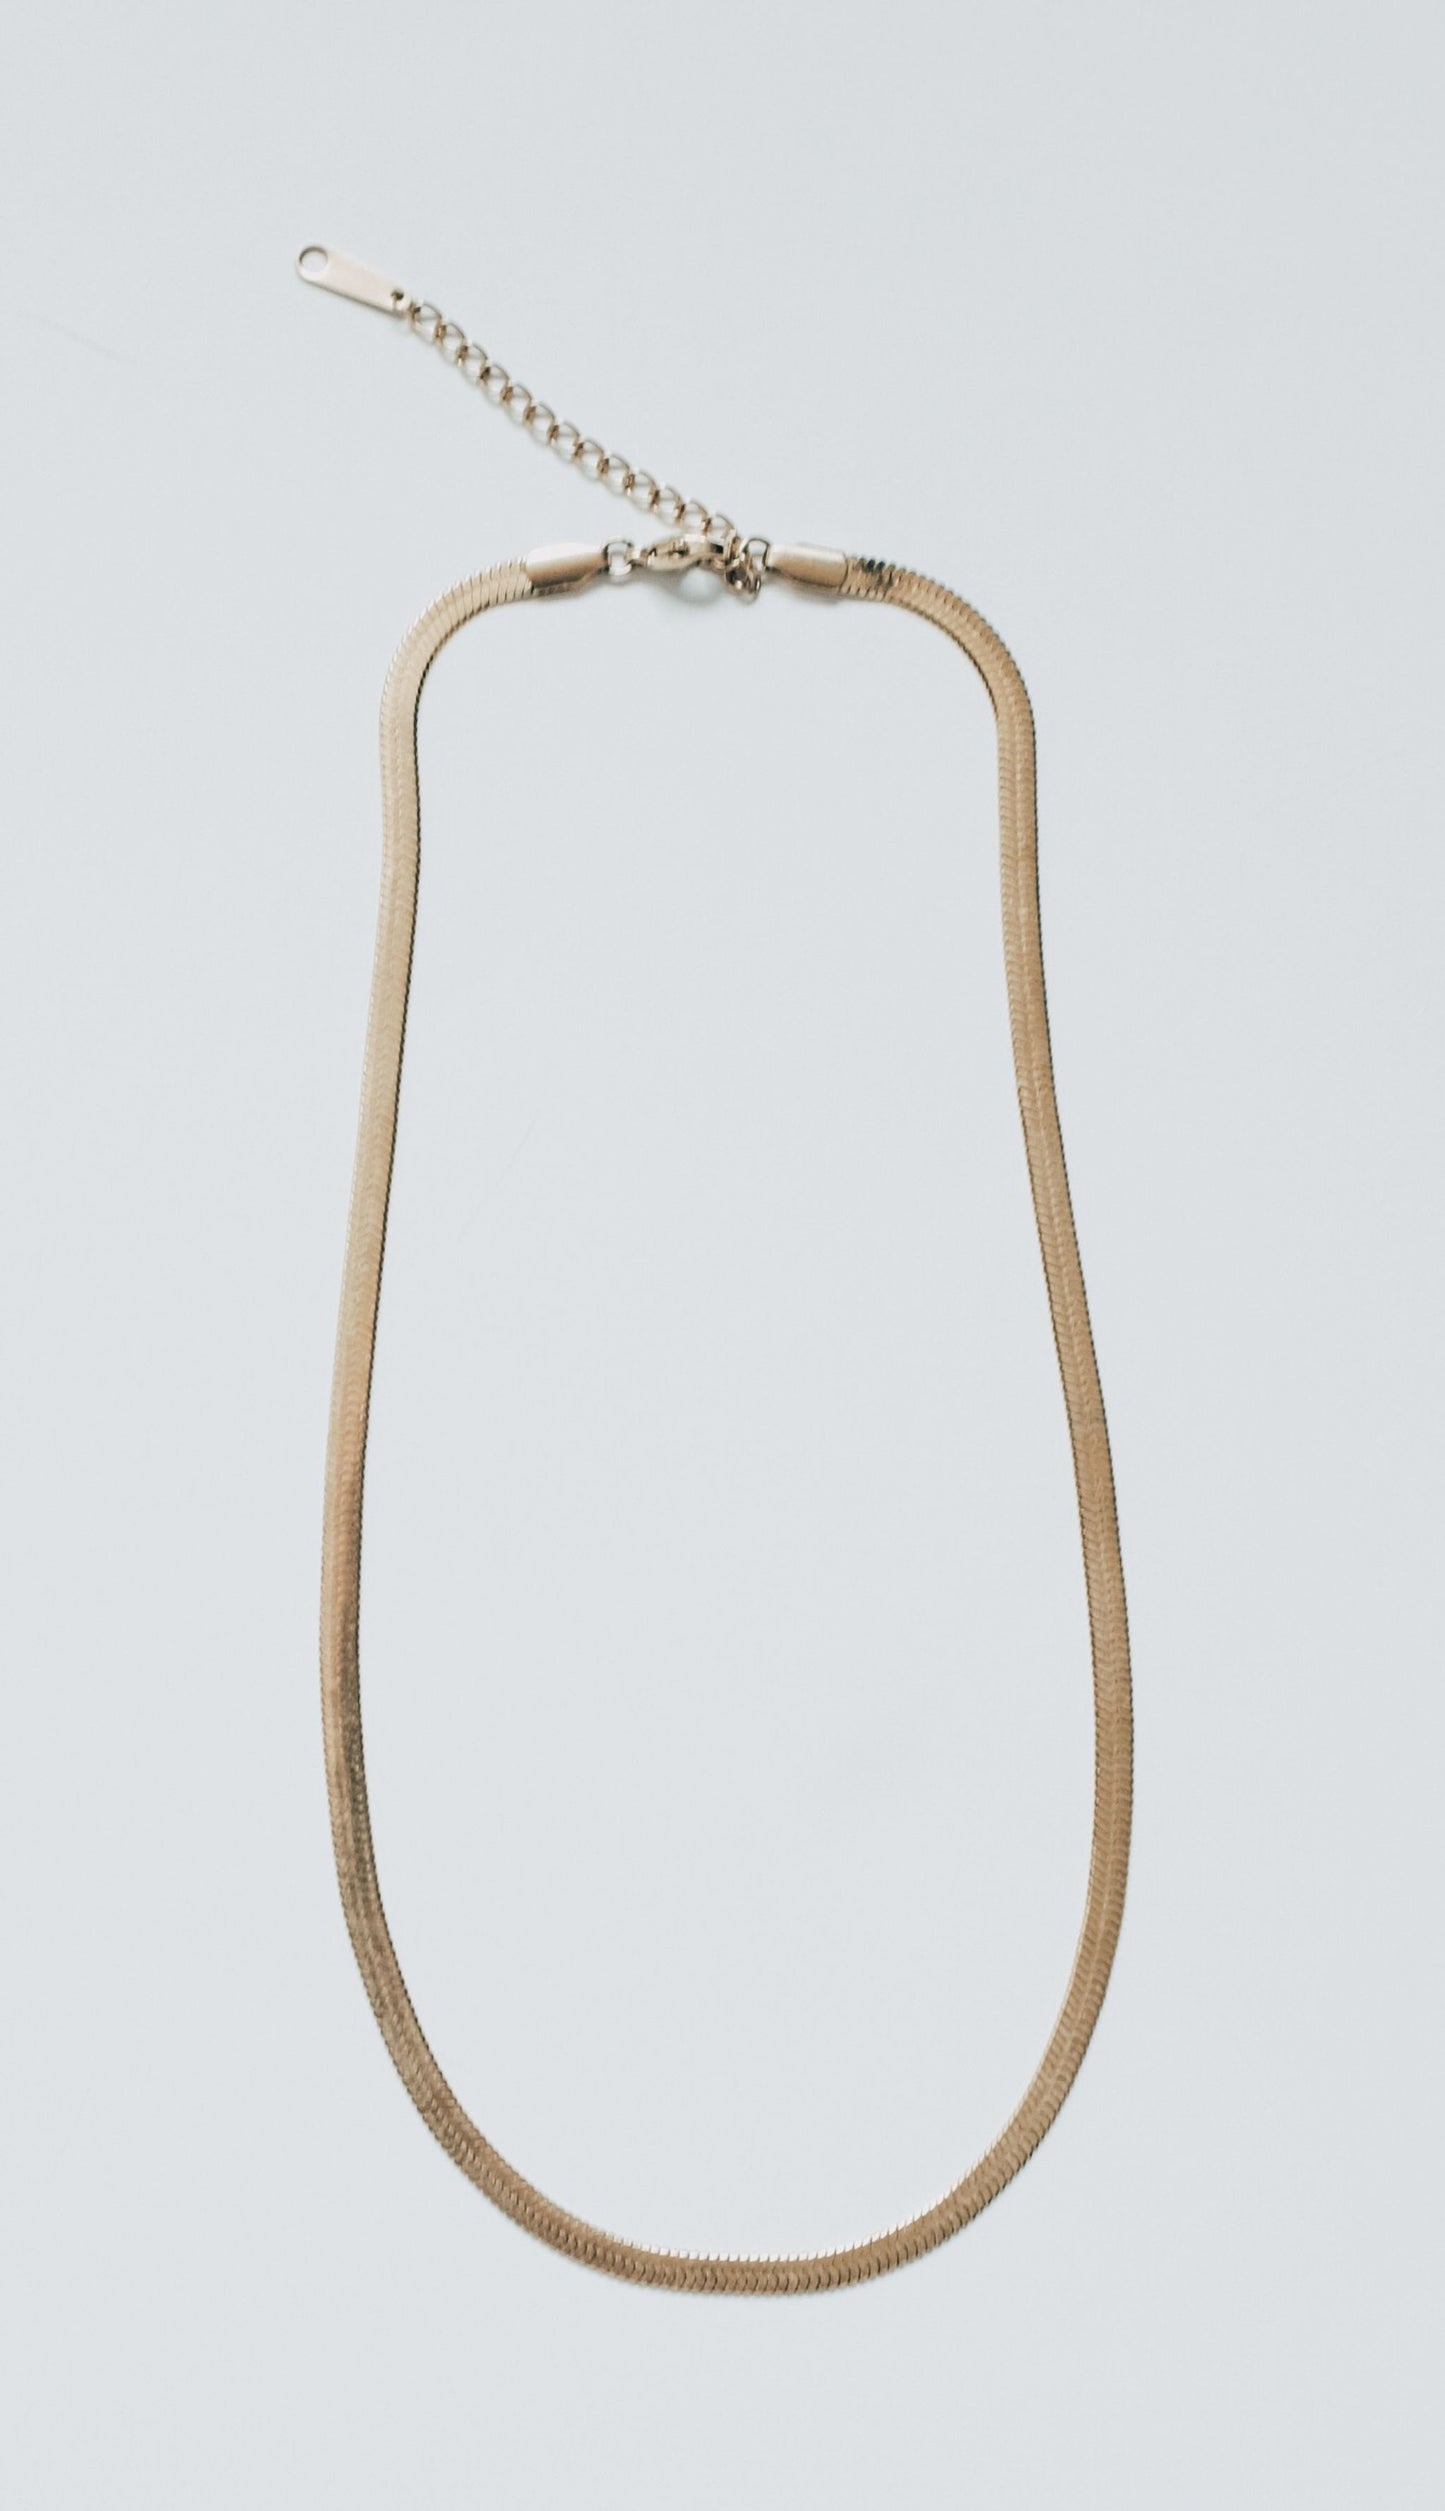 ethical fair trade gold necklace jewelry accessories anti-trafficking 